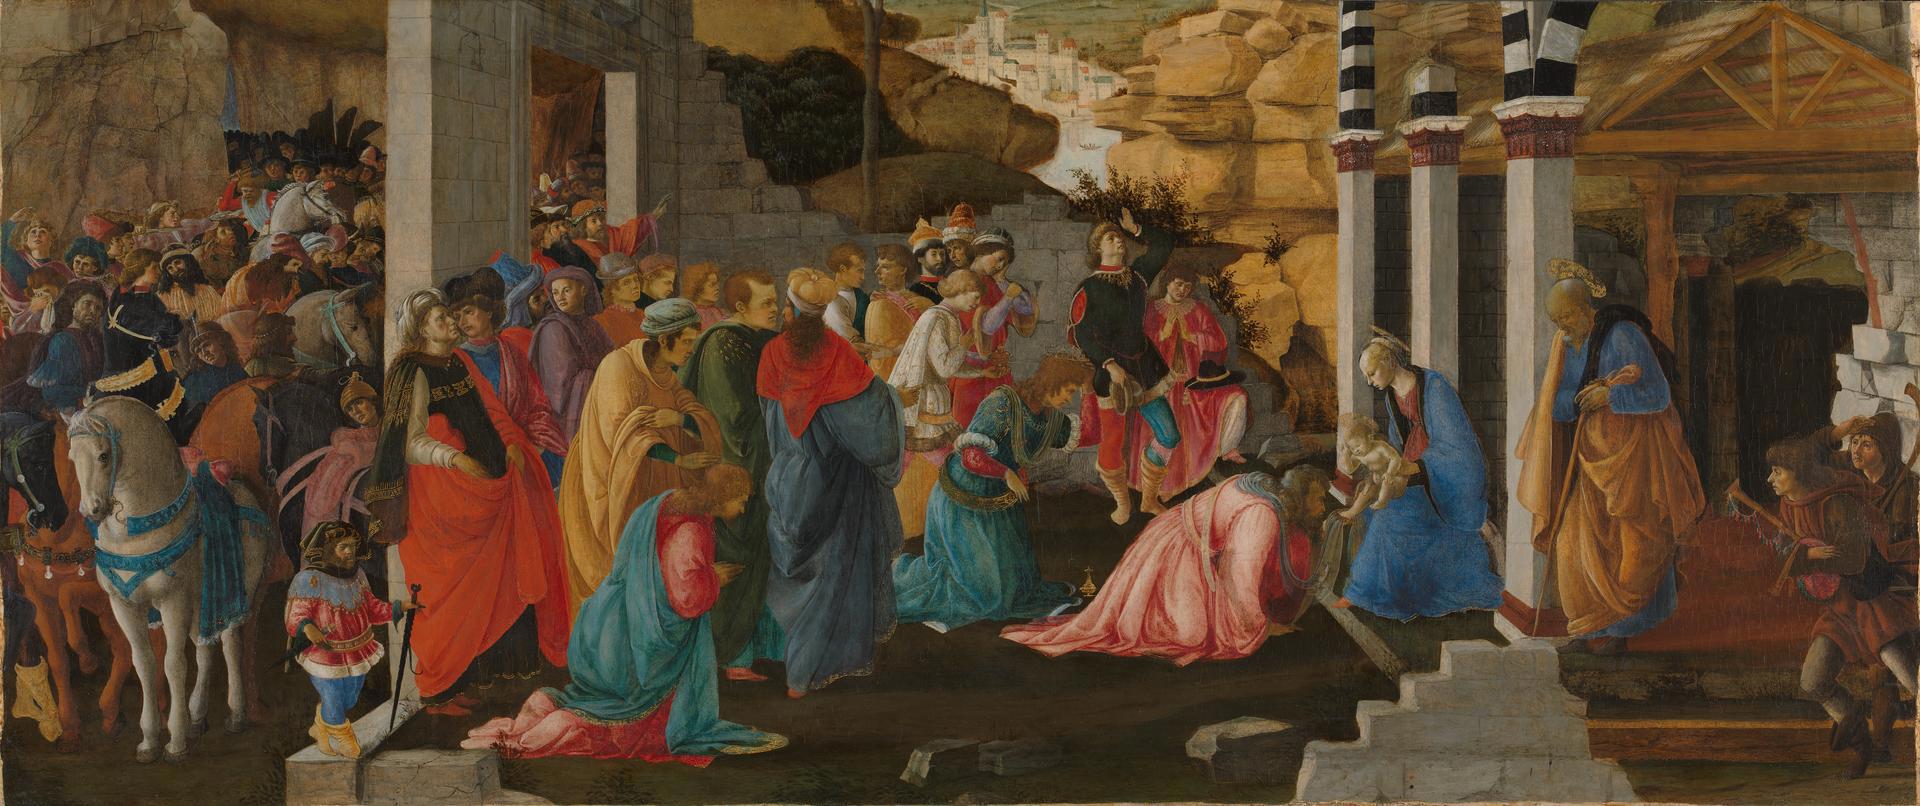 Adoration of the Kings by Sandro Botticelli and Filippino Lippi